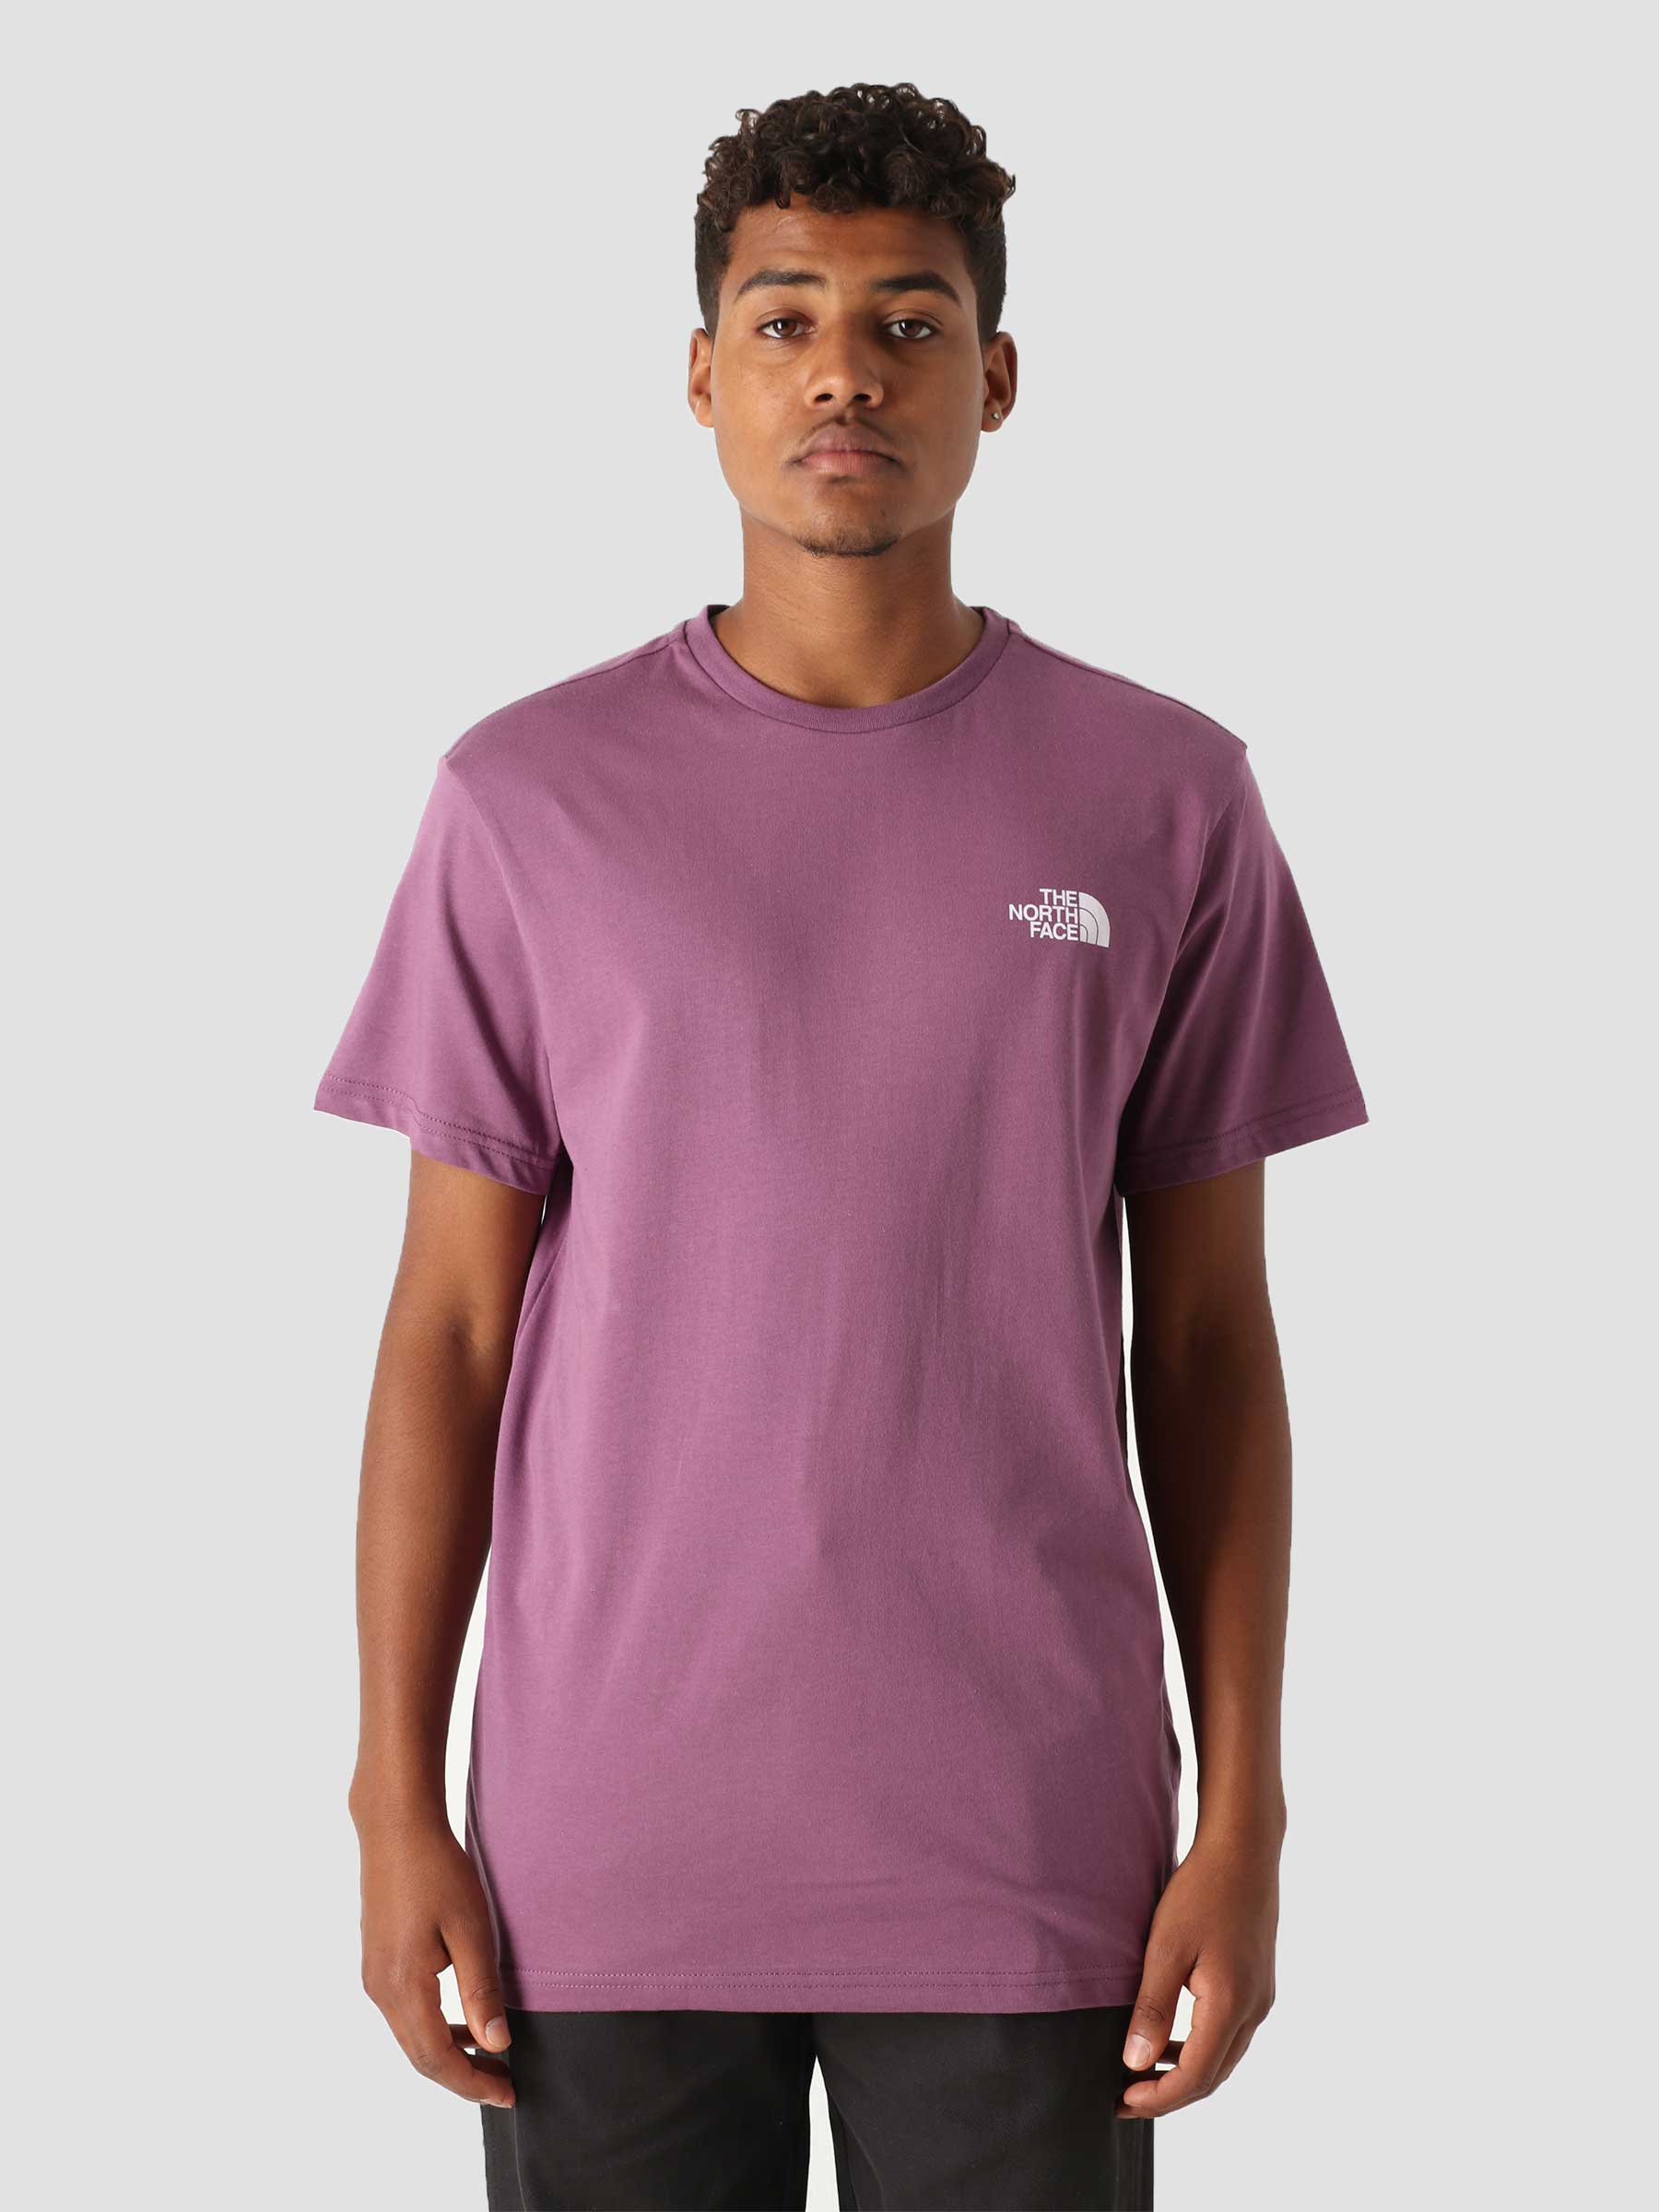 The North Face Simple Dome Purple Pikes - Freshcotton T-Shirt